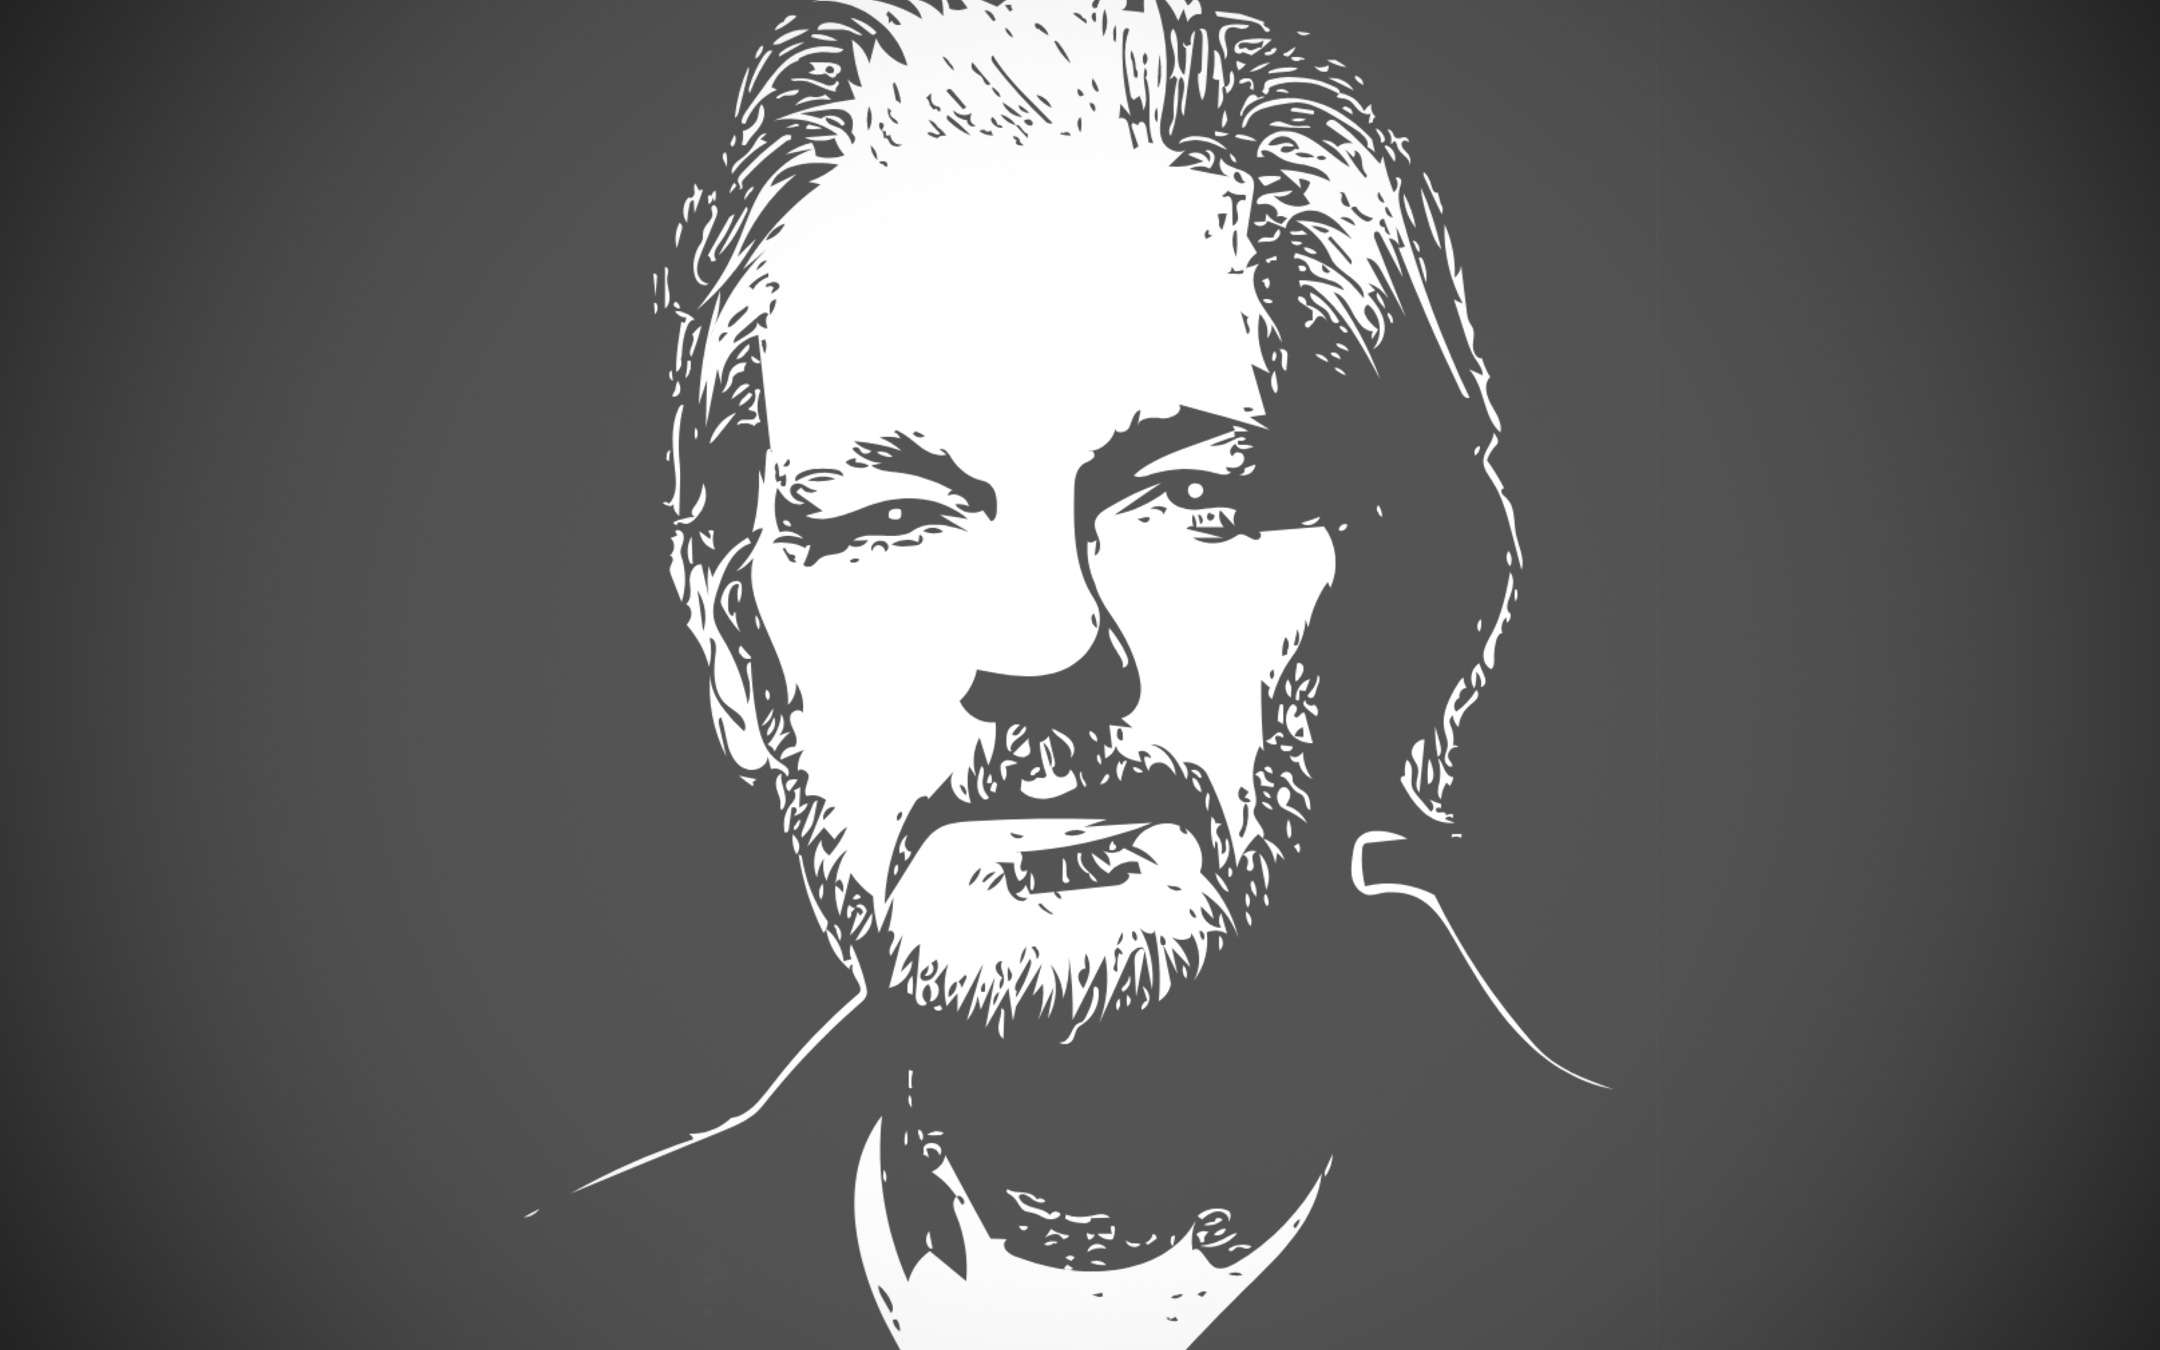 Assange: no to extradition, he risks suicide